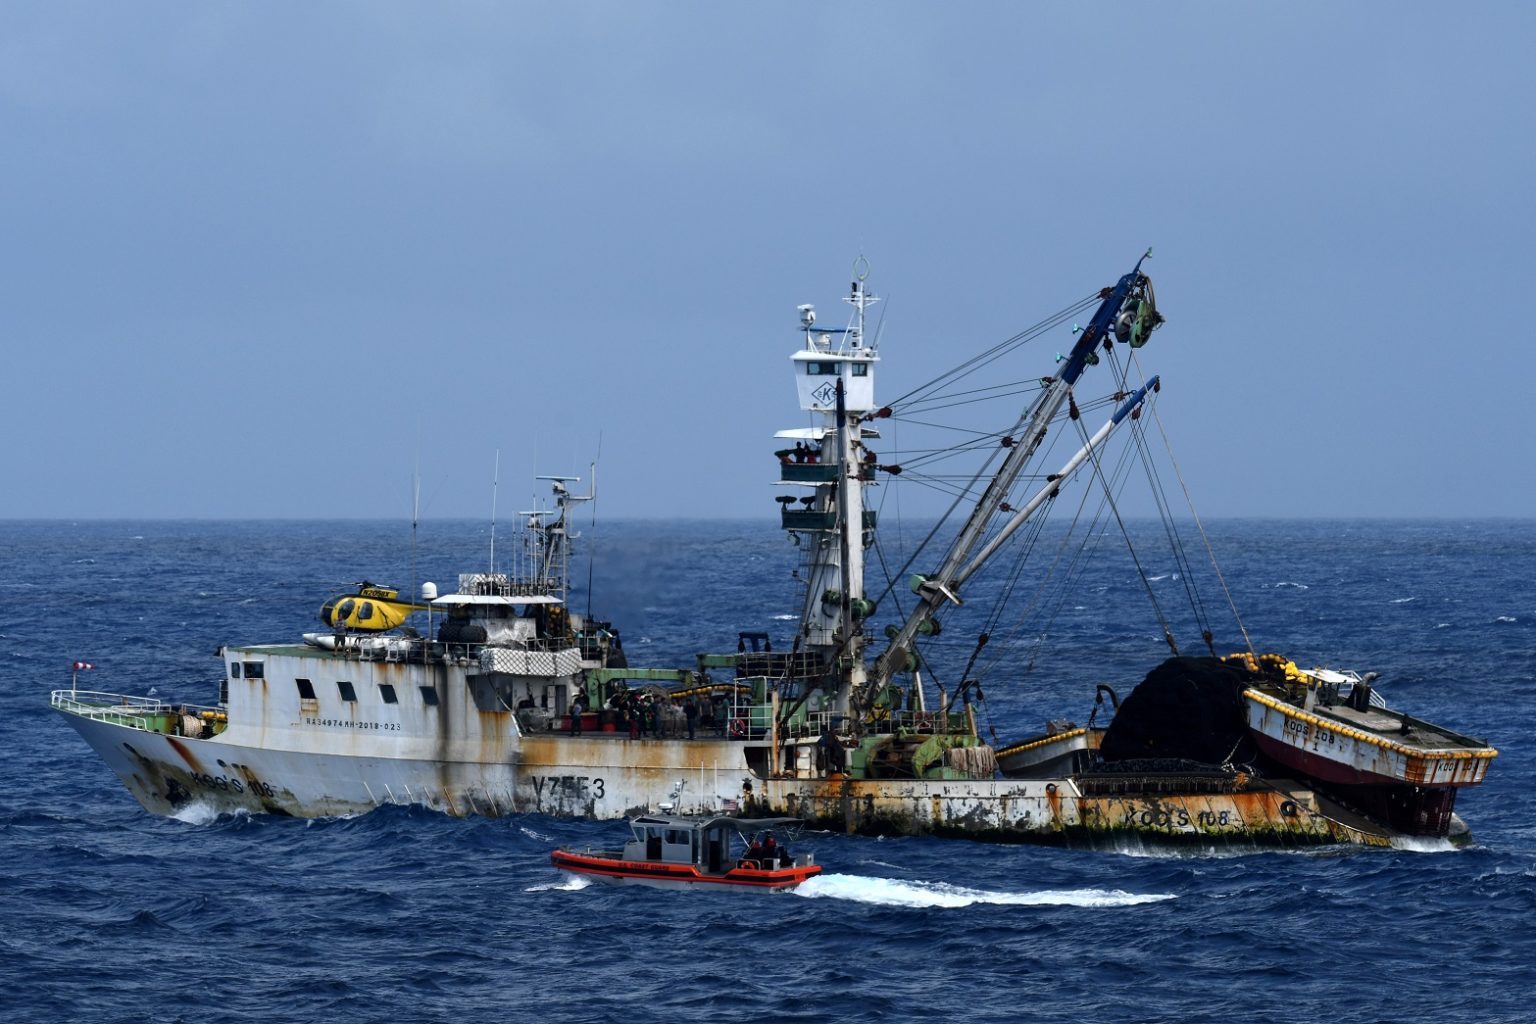 Caribbean Countries to Strengthen Measures Against Illegal Fishing